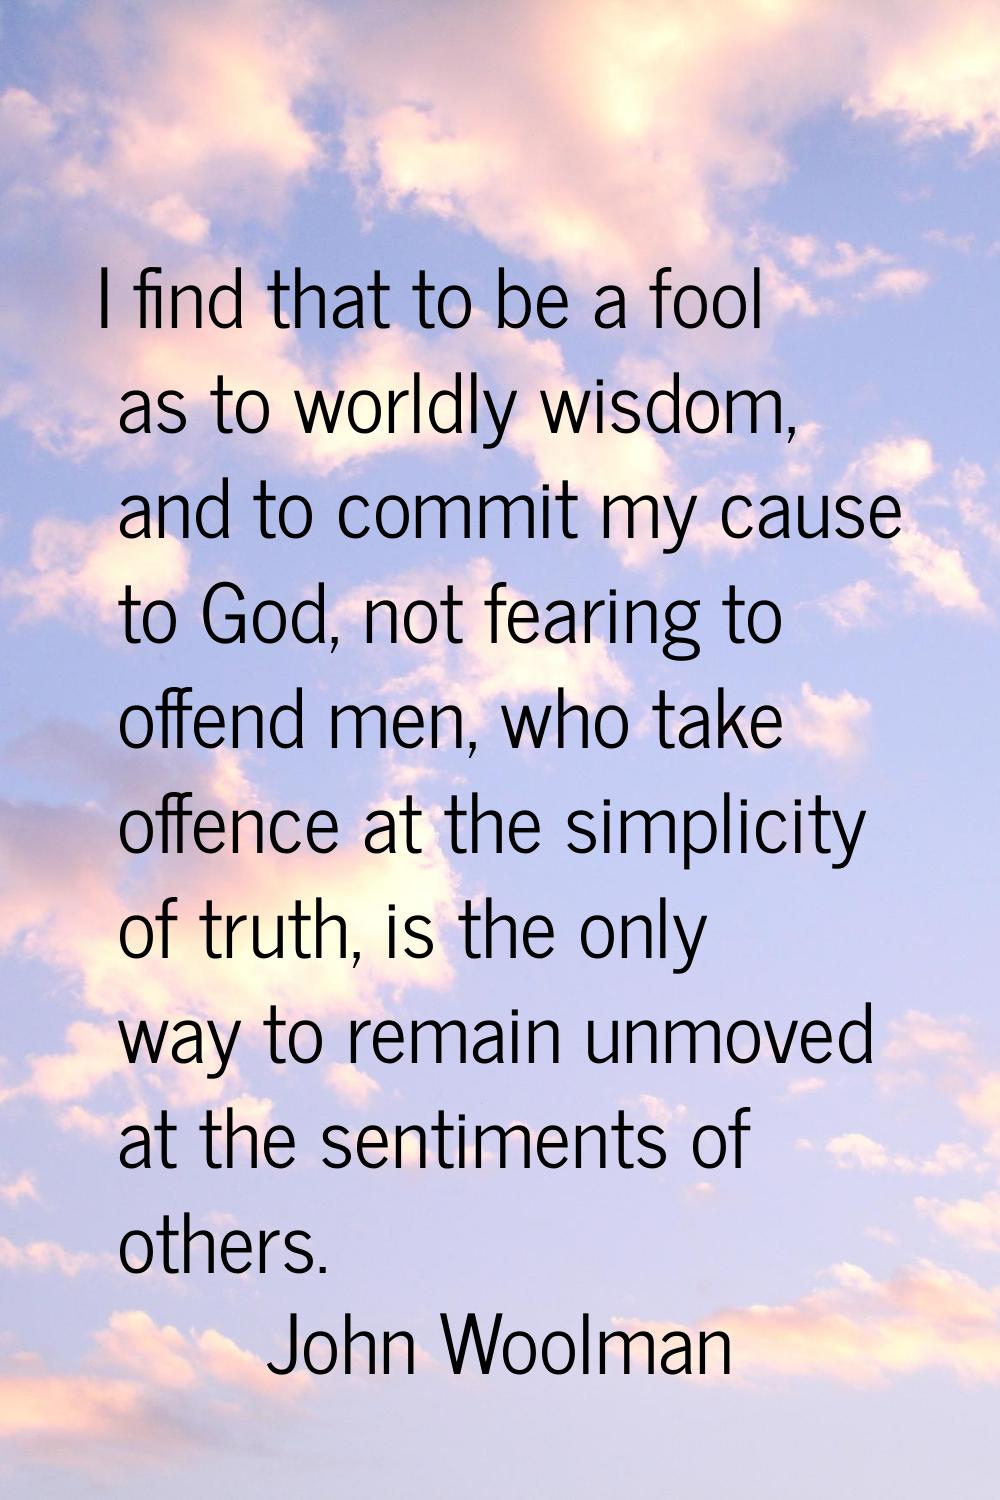 I find that to be a fool as to worldly wisdom, and to commit my cause to God, not fearing to offend